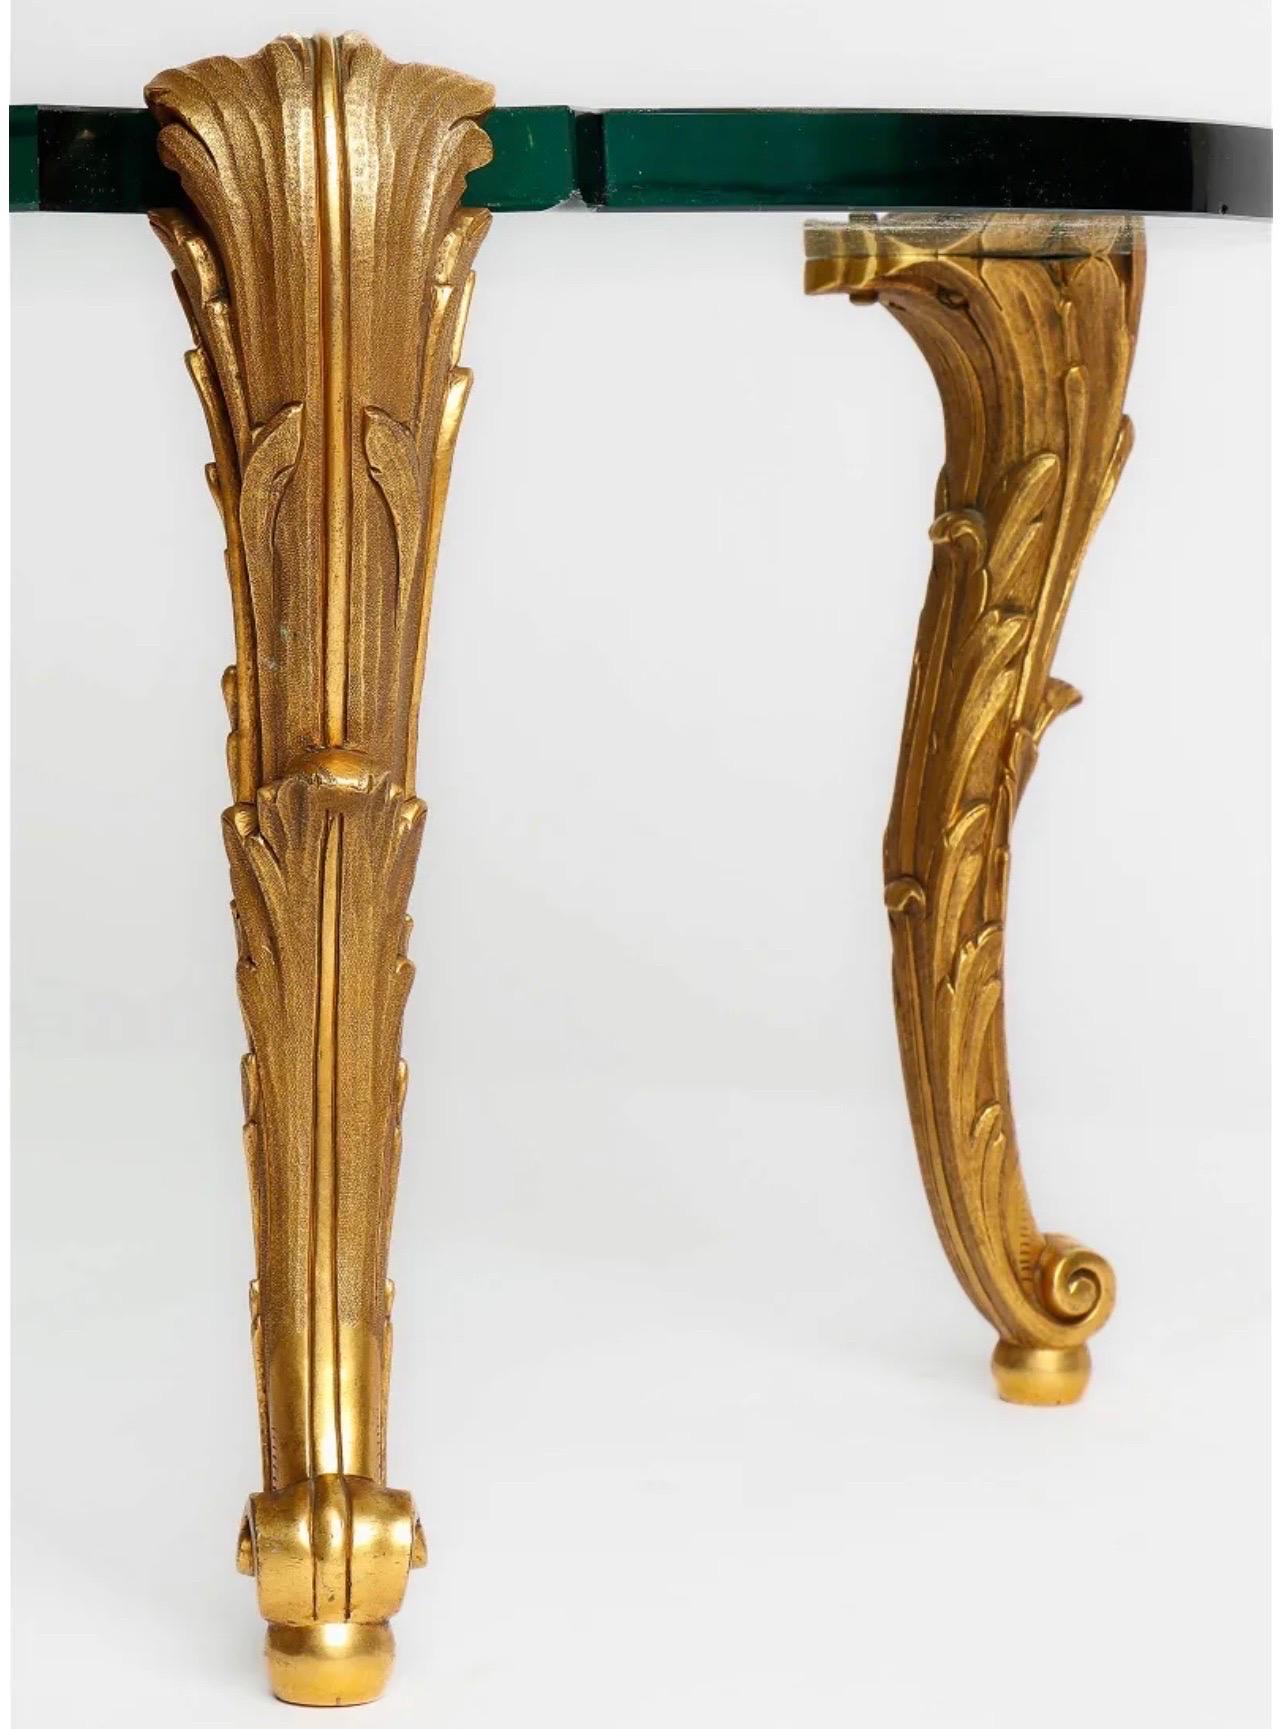 Wonderful P.E. Guerin leaf / Cartouche gilt bronze & thick oval glass coffee / cocktail table, in the Louis XV manner. Each of the heavy bronze legs, marked on the bottom of the foot. Glass does have minor imperfection, flea bite chip to